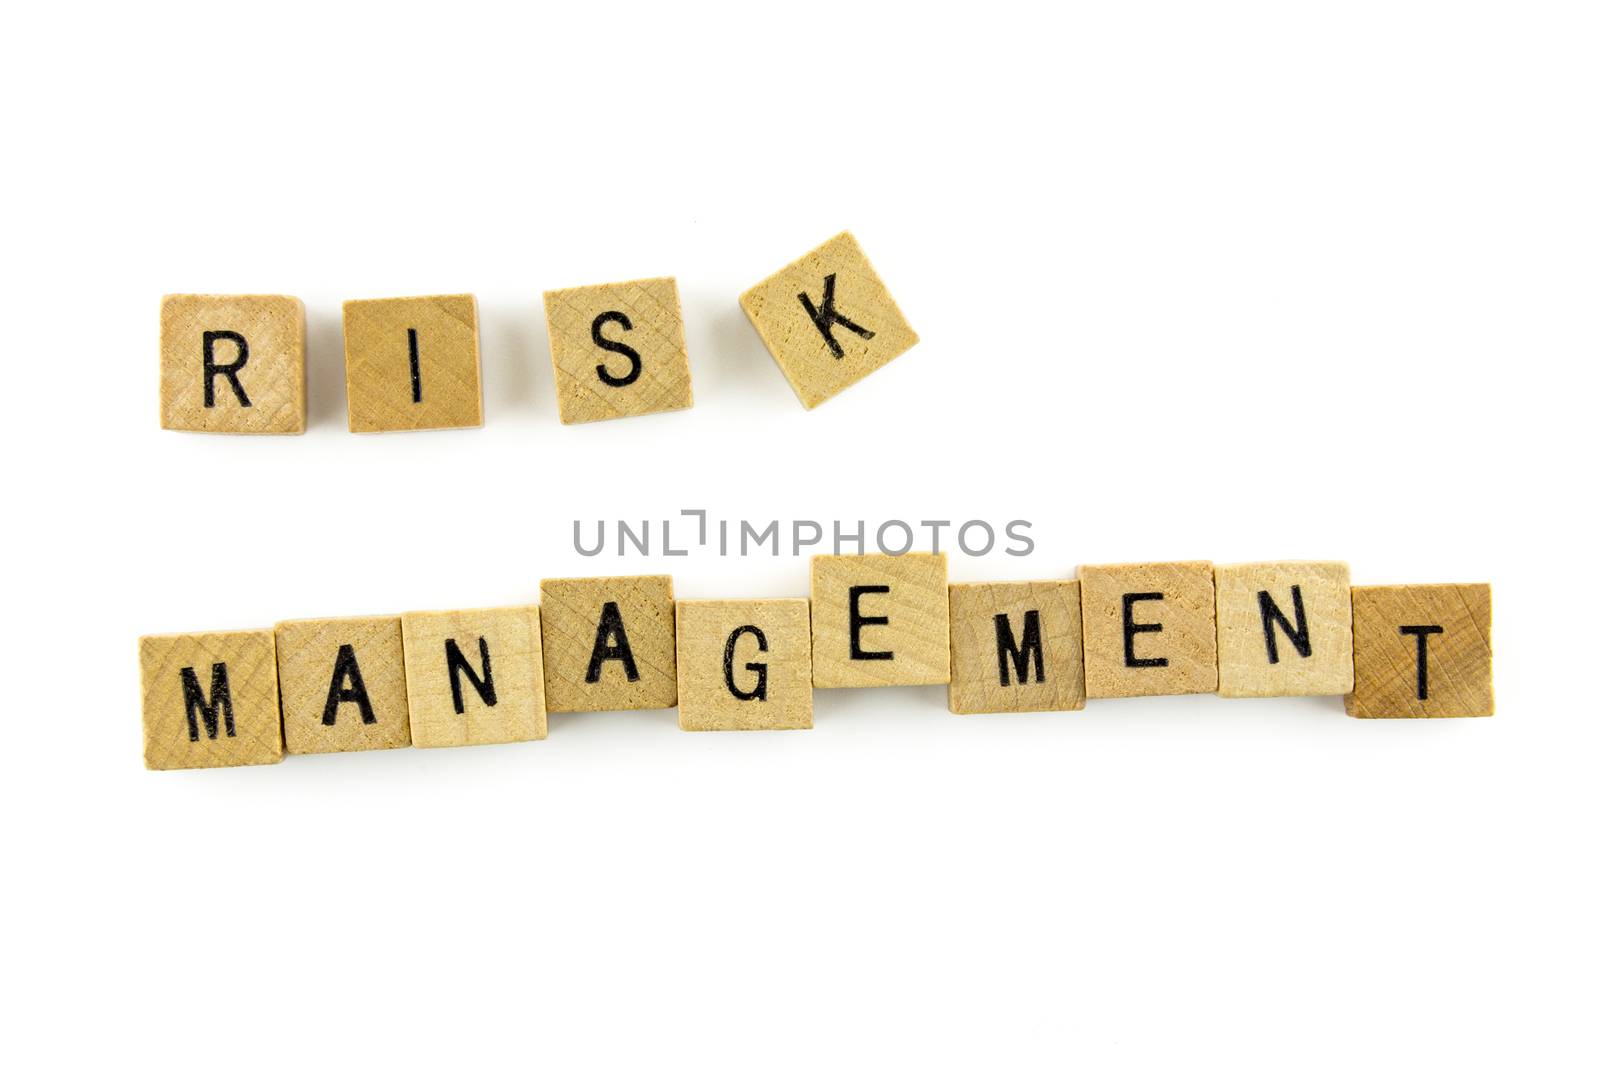 "RISK MANAGEMENT" text on wooden cubes, isolated on white backgr by urubank